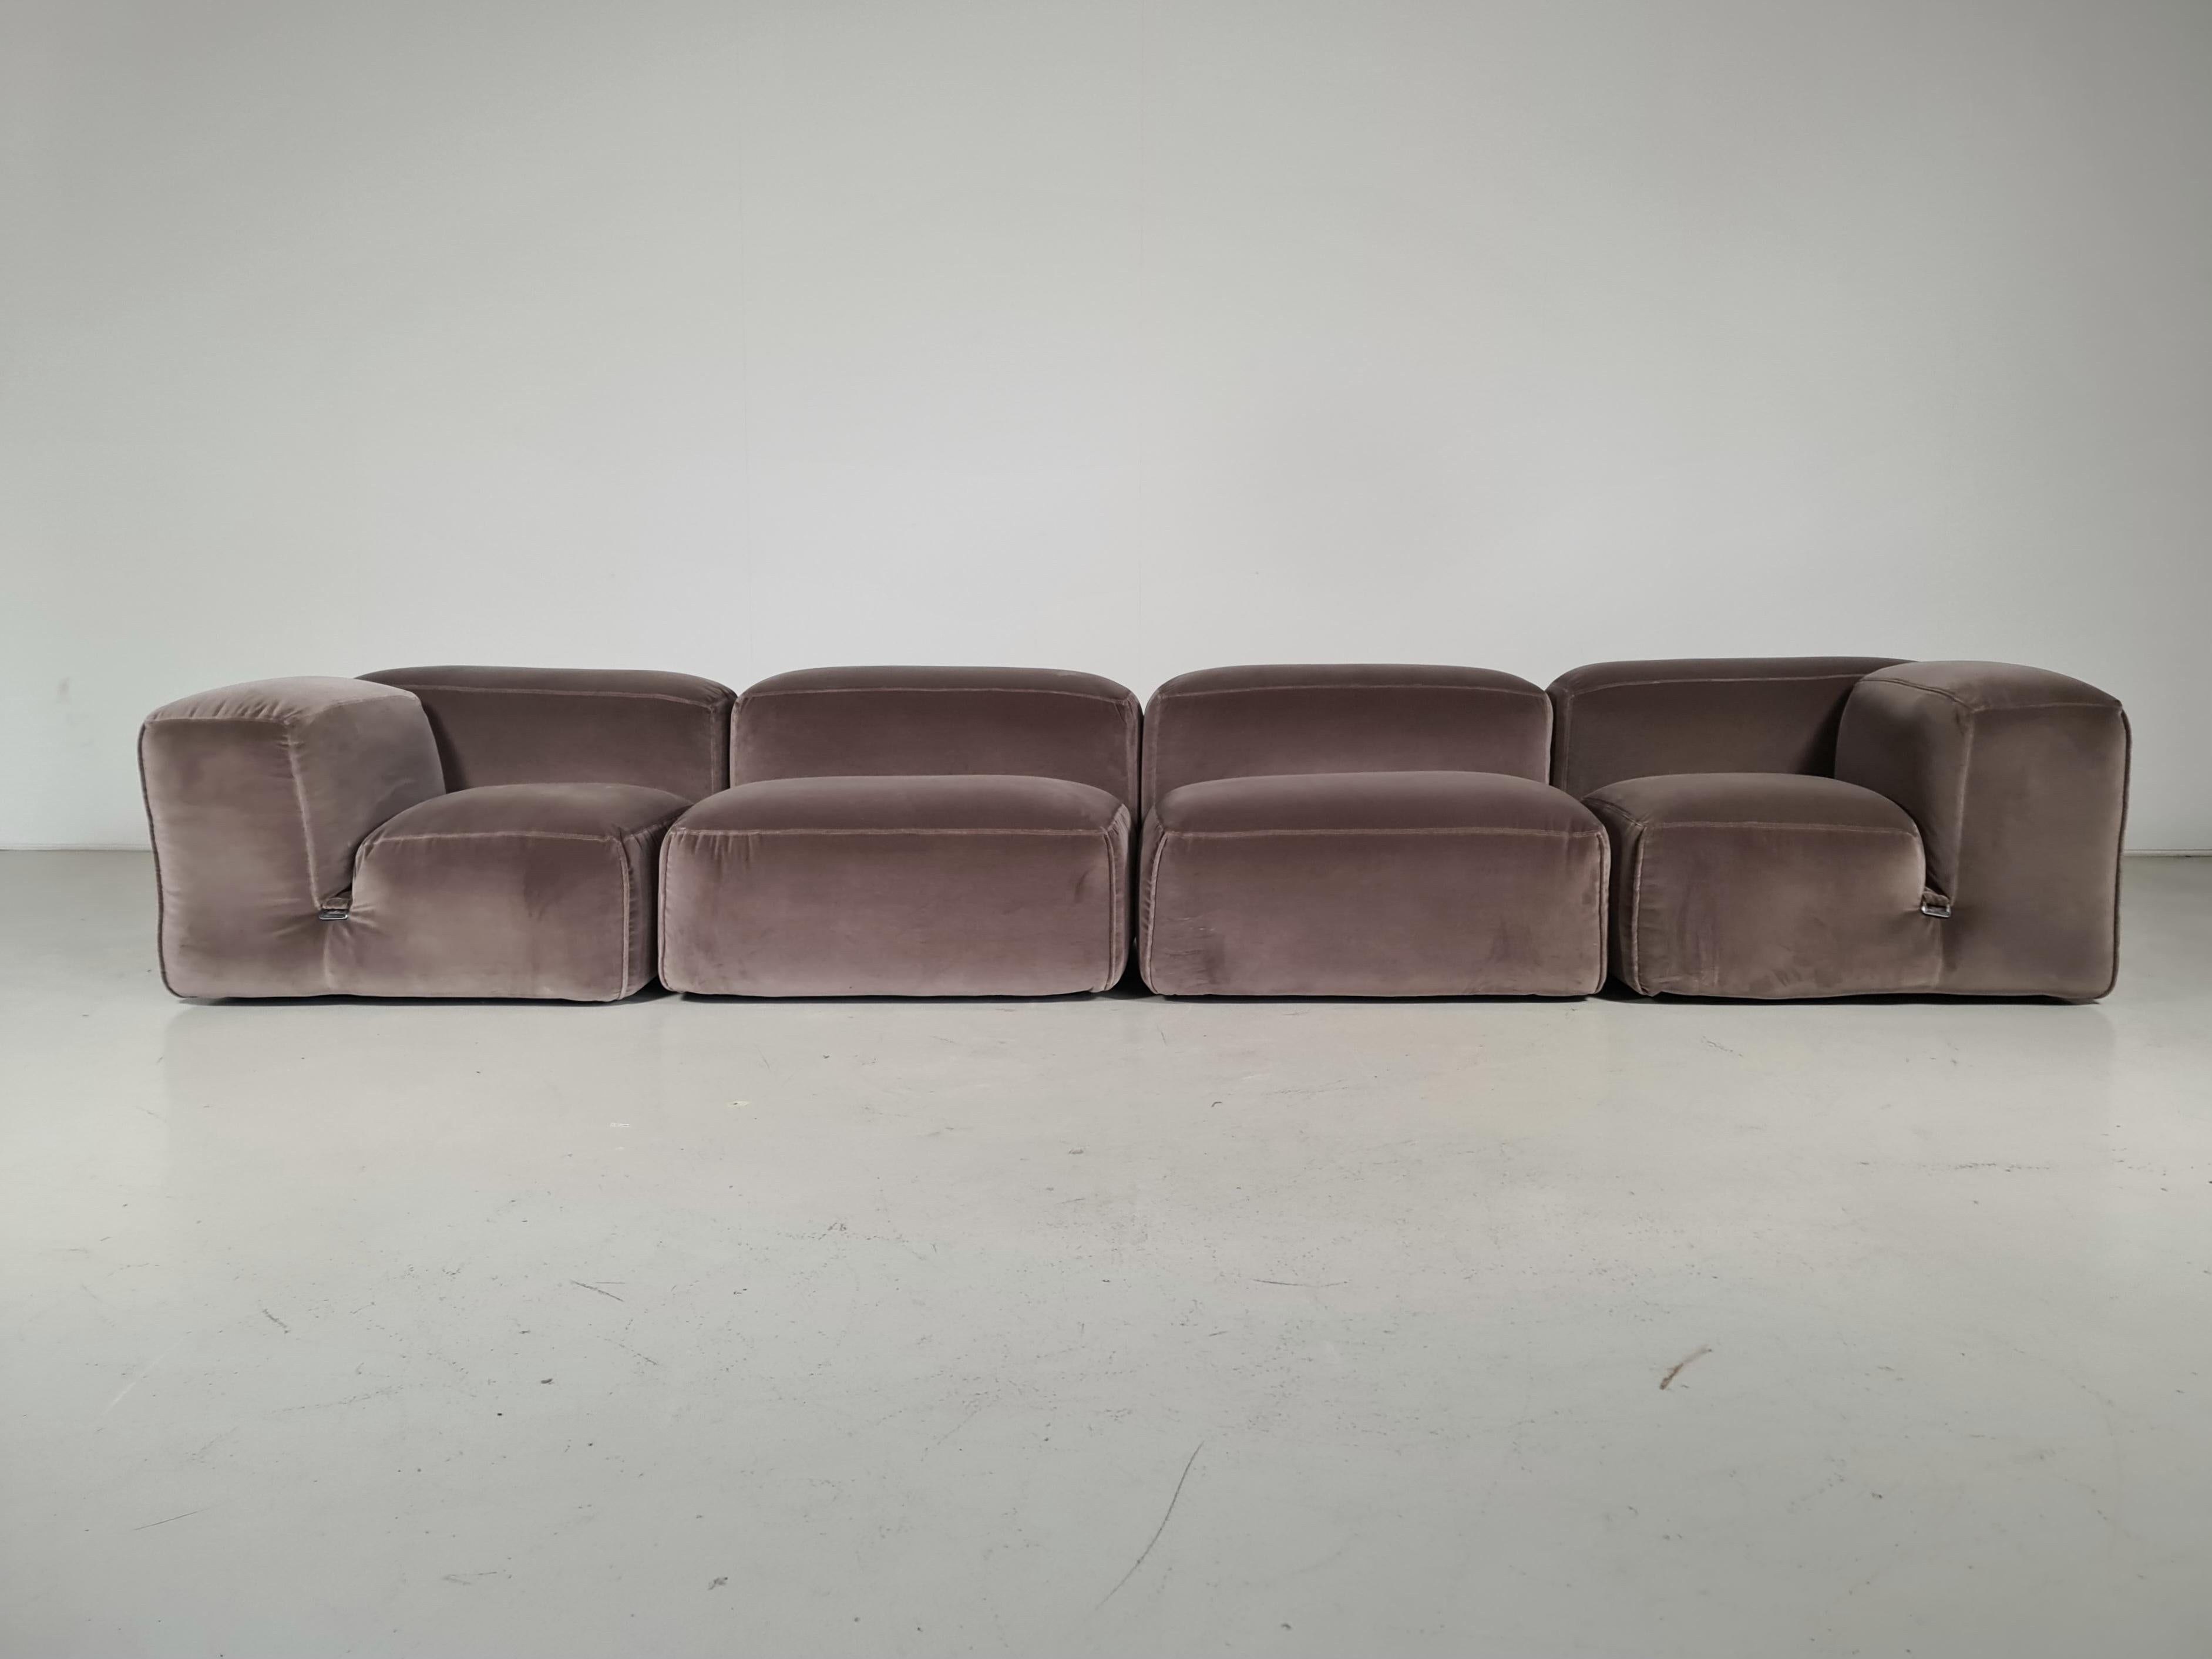 Late 20th Century Le Mura 4-Seater Sofa in beige/grey velvet by Mario Bellini for Cassina, 1970s For Sale